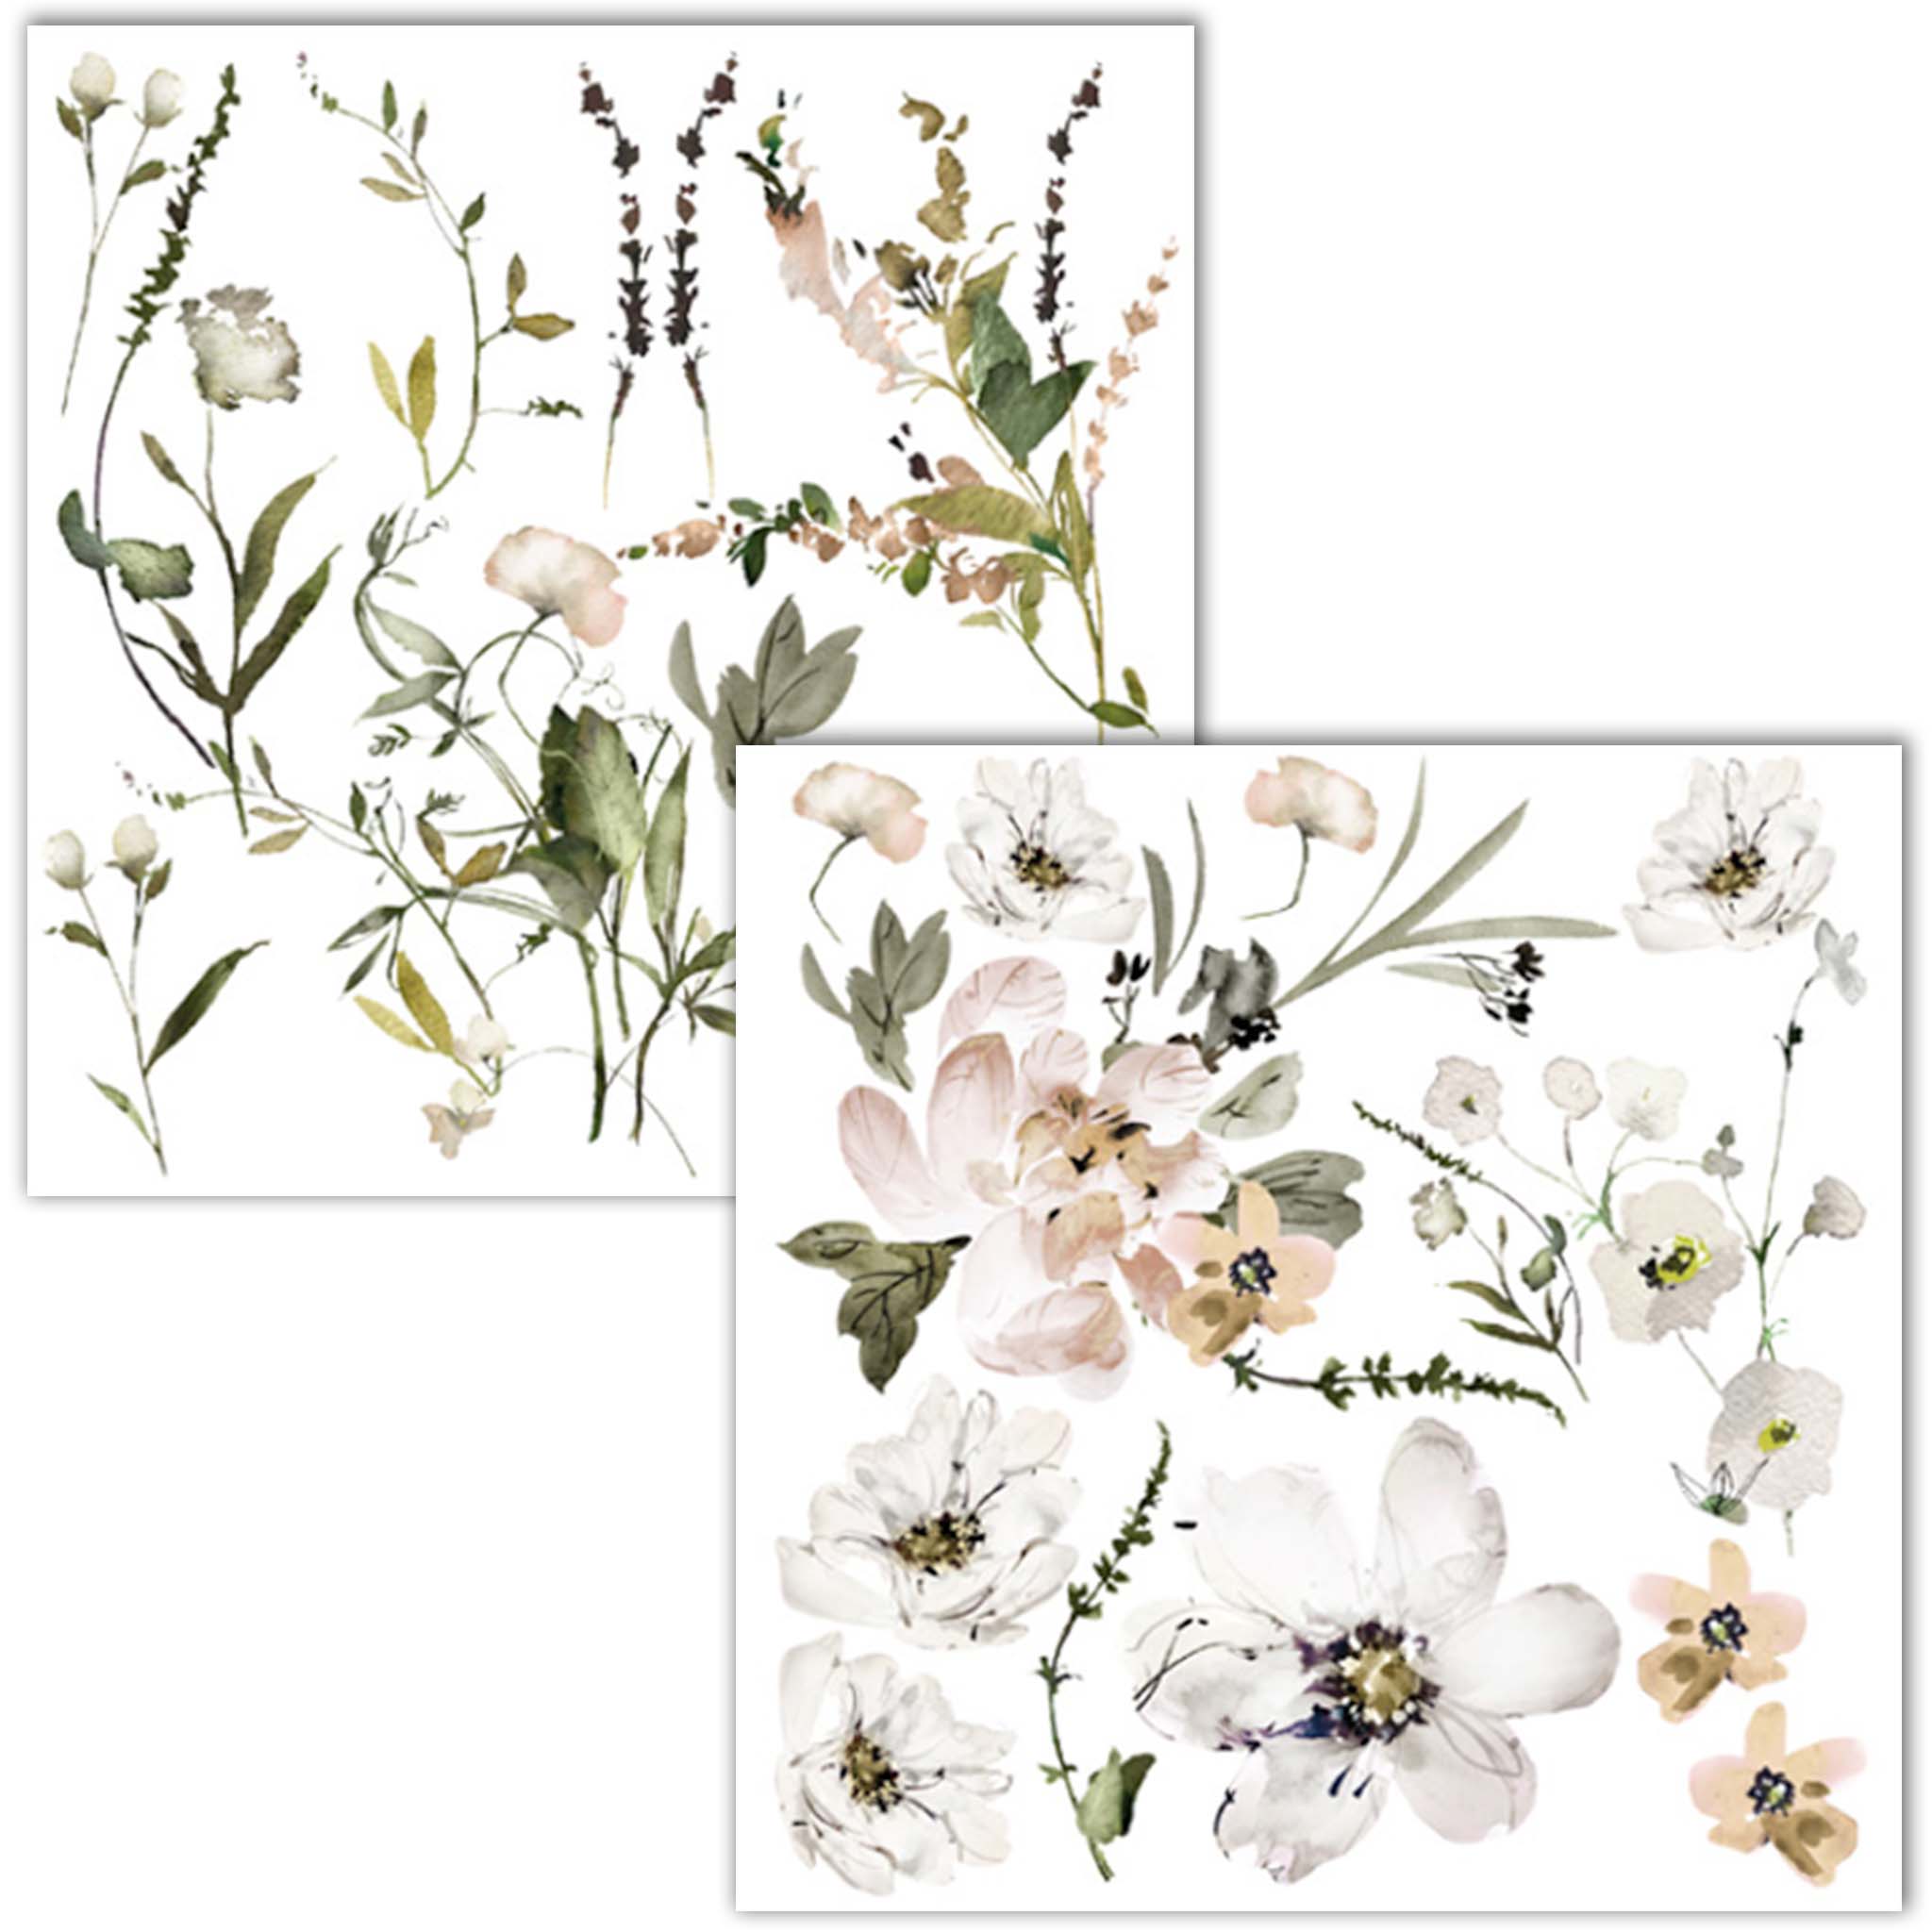 Two sheets of 12"x12" rub-on transfers are against a white background and feature delicate flowers in pale blush, cream, and white, accented by sprigs of greenery.